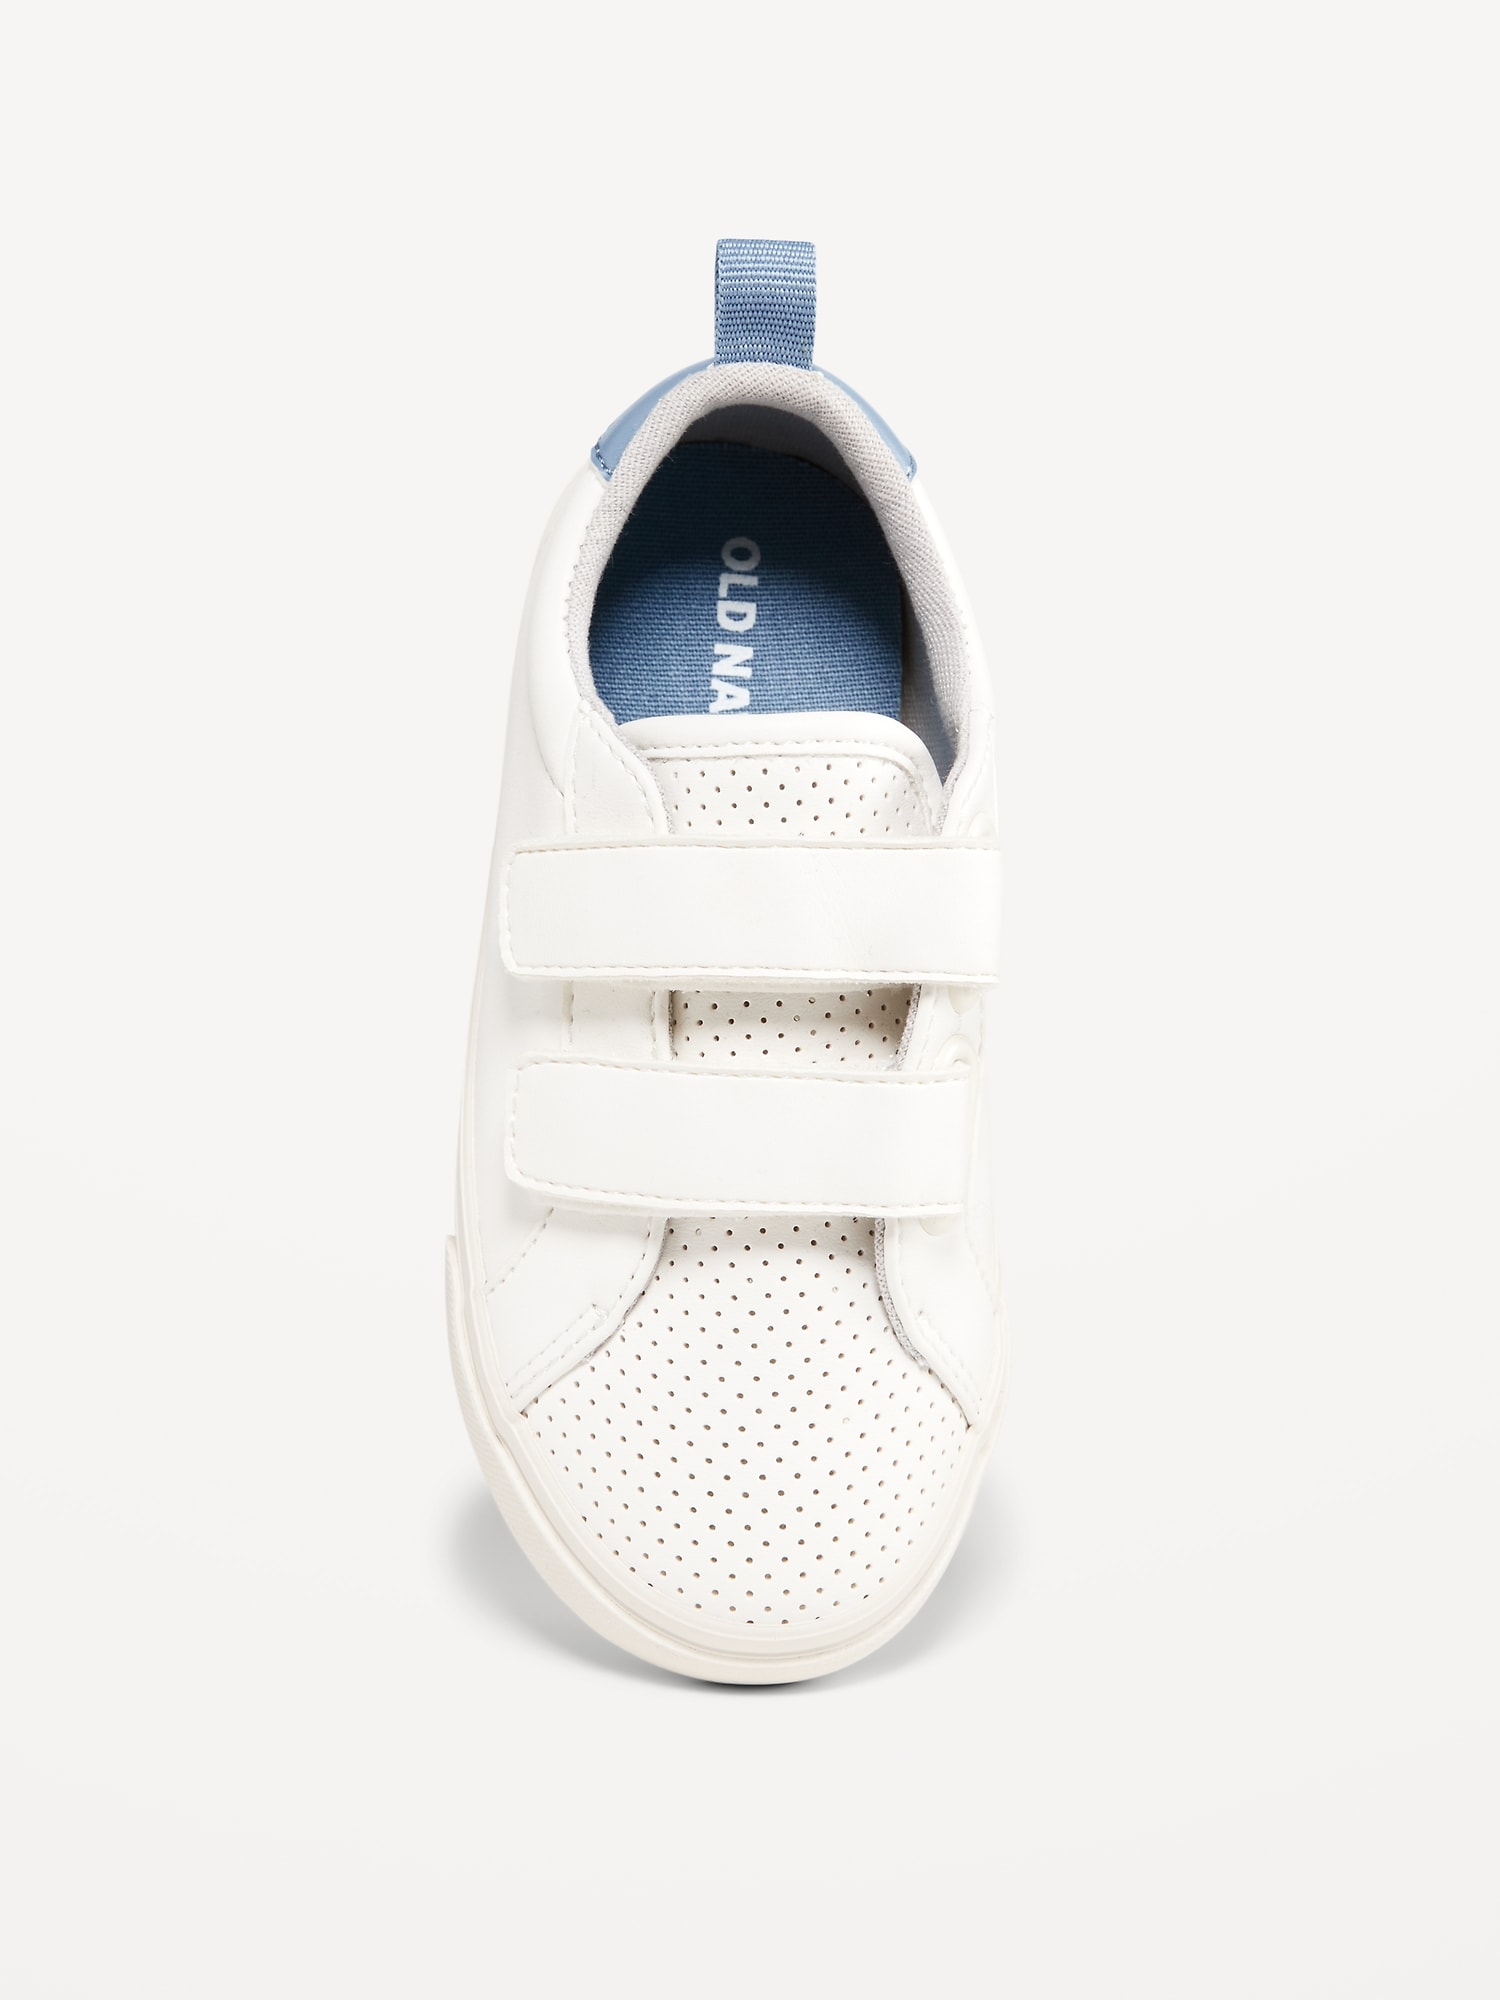 Double Secure-Strap Sneakers for Toddler Boys